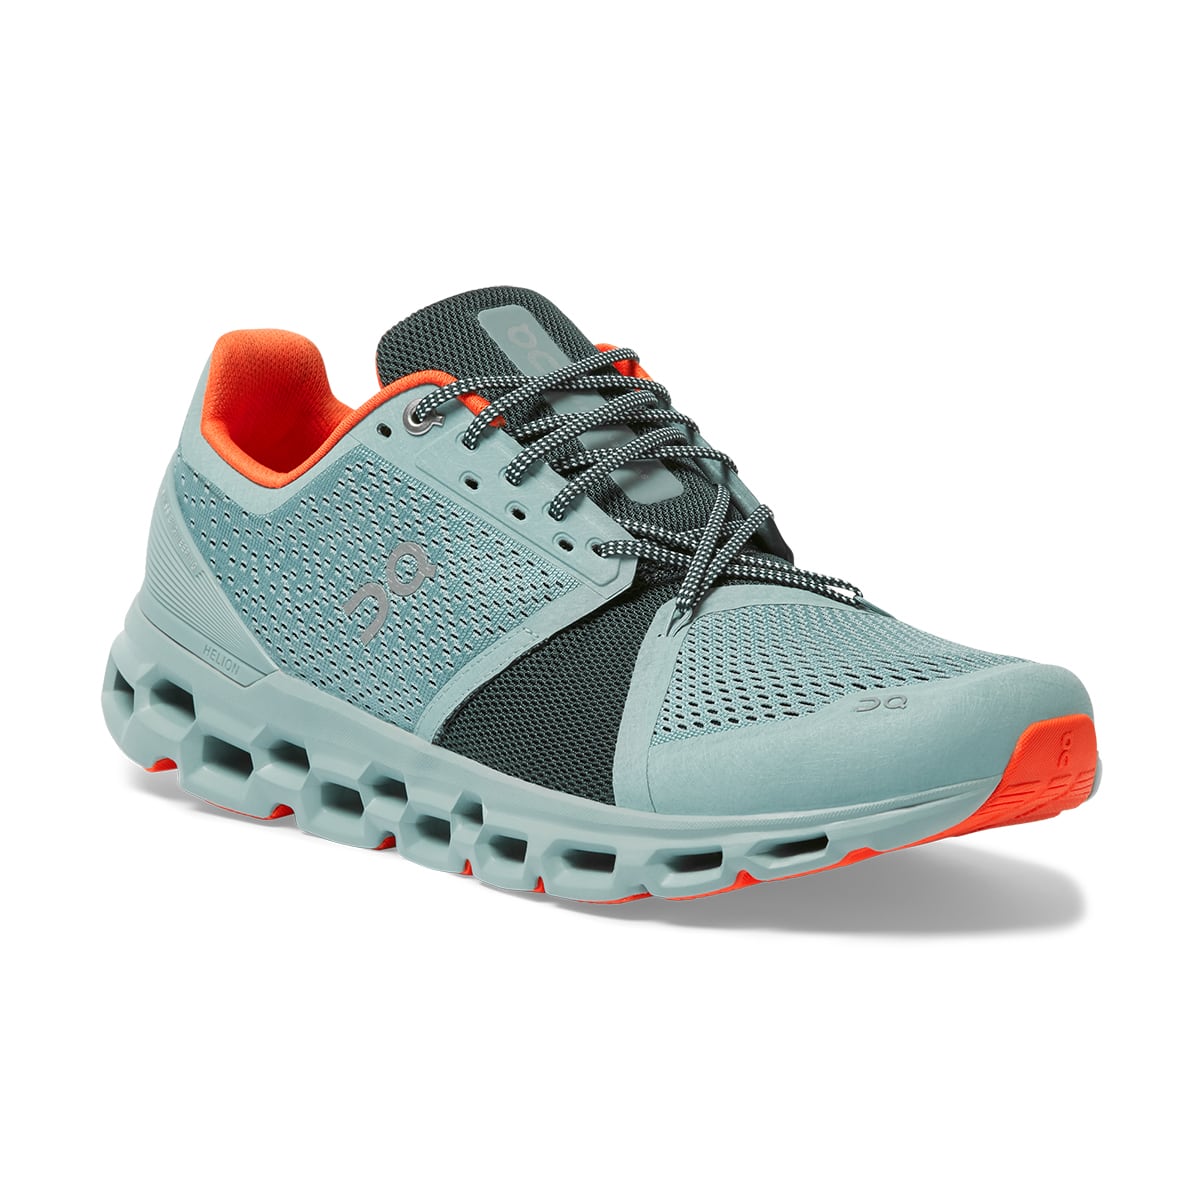 Run longer and twice as fast with On Cloudstratus 3 running shoe!, News